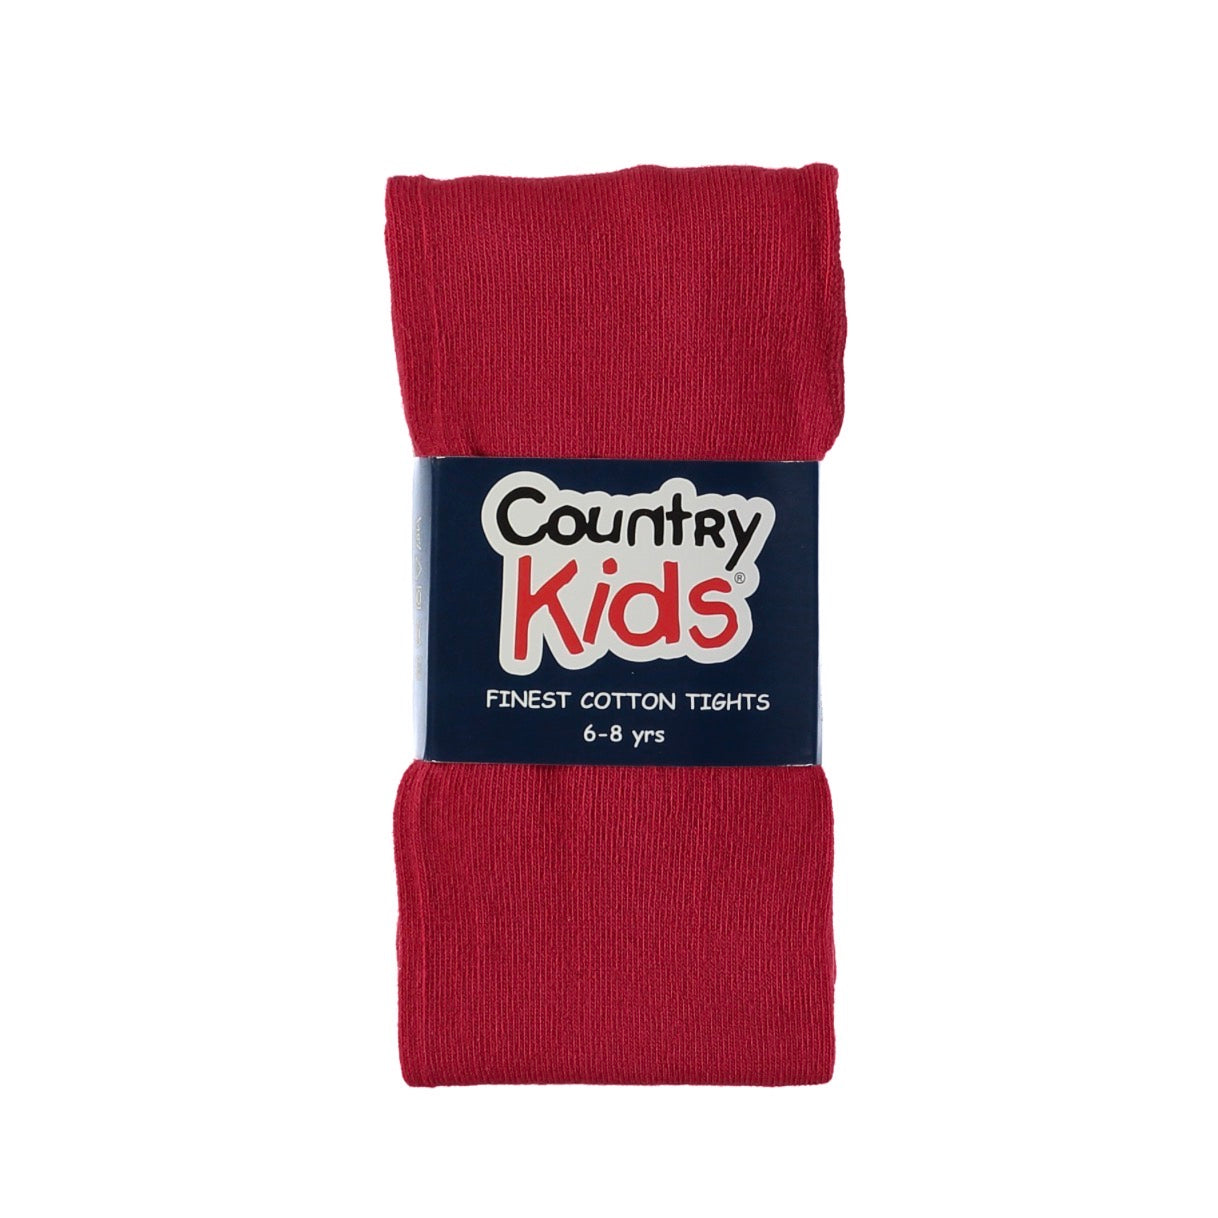 Country Kids Plain Tights Ruby Red Clothing 1-3YRS / Ruby,3-5YRS / Ruby,6-8YRS / Ruby,9-11YRS / Ruby,12-15YRS / Ruby